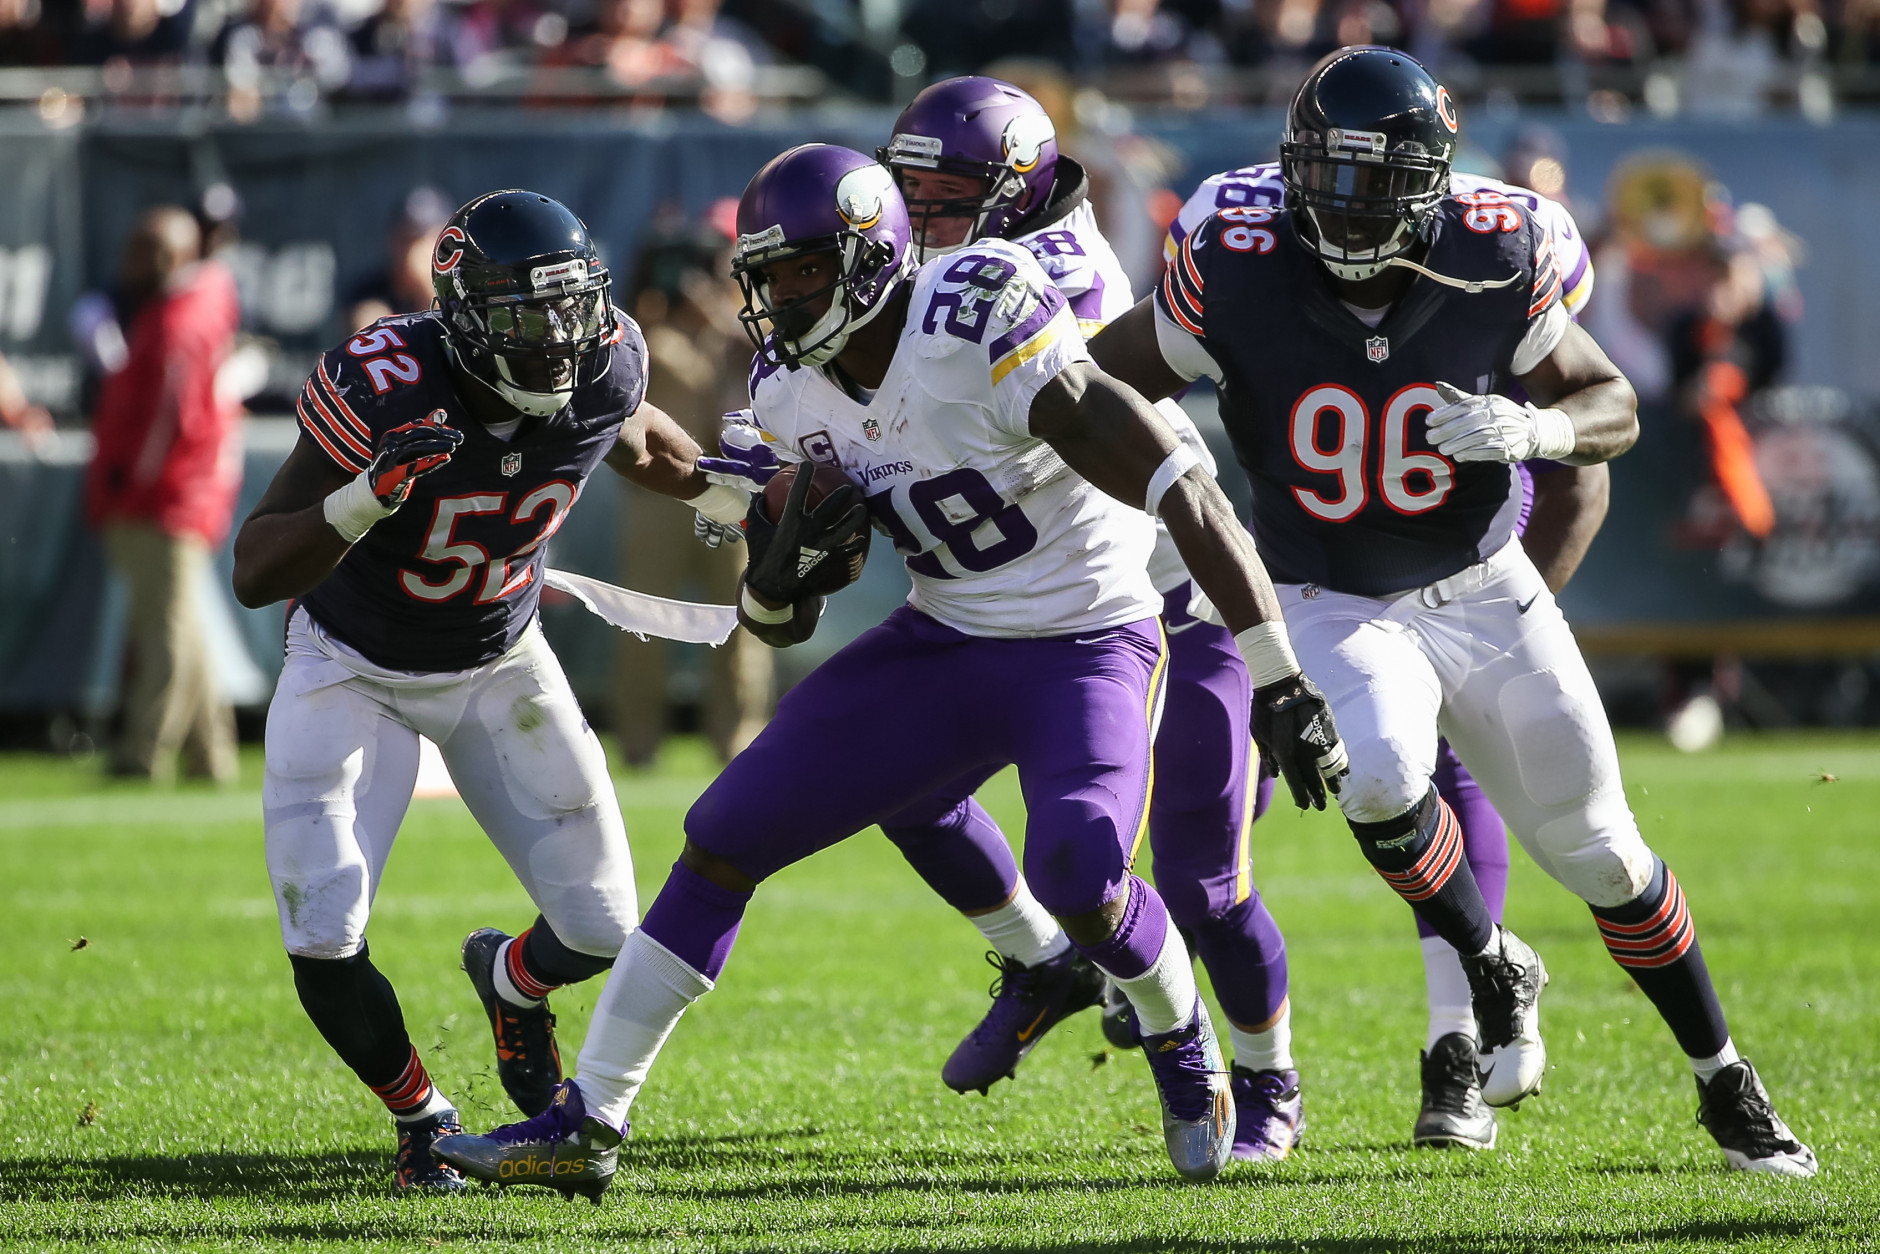 CHICAGO, IL - NOVEMBER 01:   Adrian Peterson #28 of the Minnesota Vikings carries the football against  LaRoy Reynolds #52 and  Jarvis Jenkins #96 of the Chicago Bears in the second quarter at Soldier Field on November 1, 2015 in Chicago, Illinois.  (Photo by Jonathan Daniel/Getty Images)